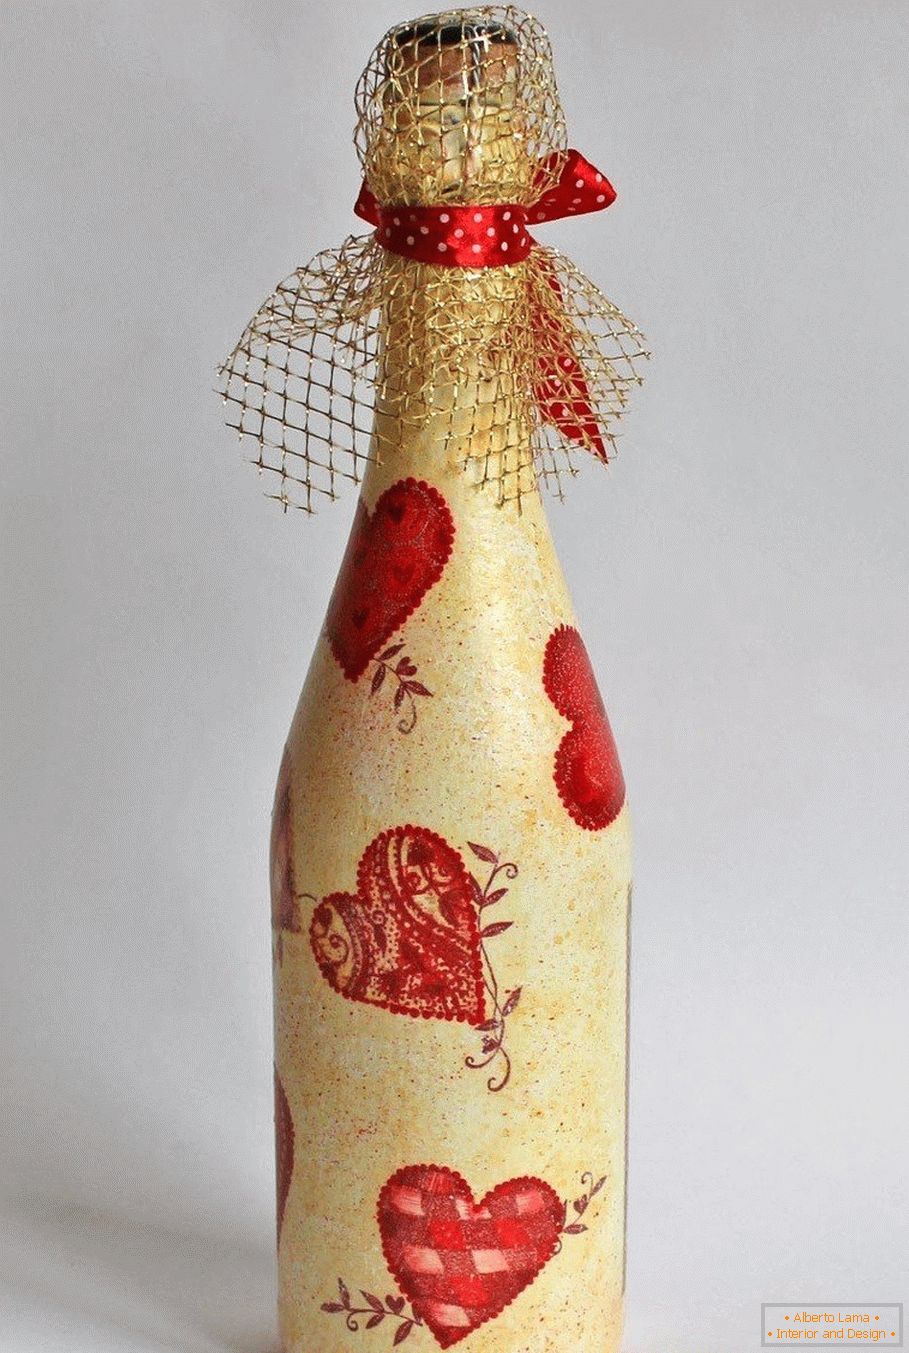 Decor of the bottle for Valentine's Day